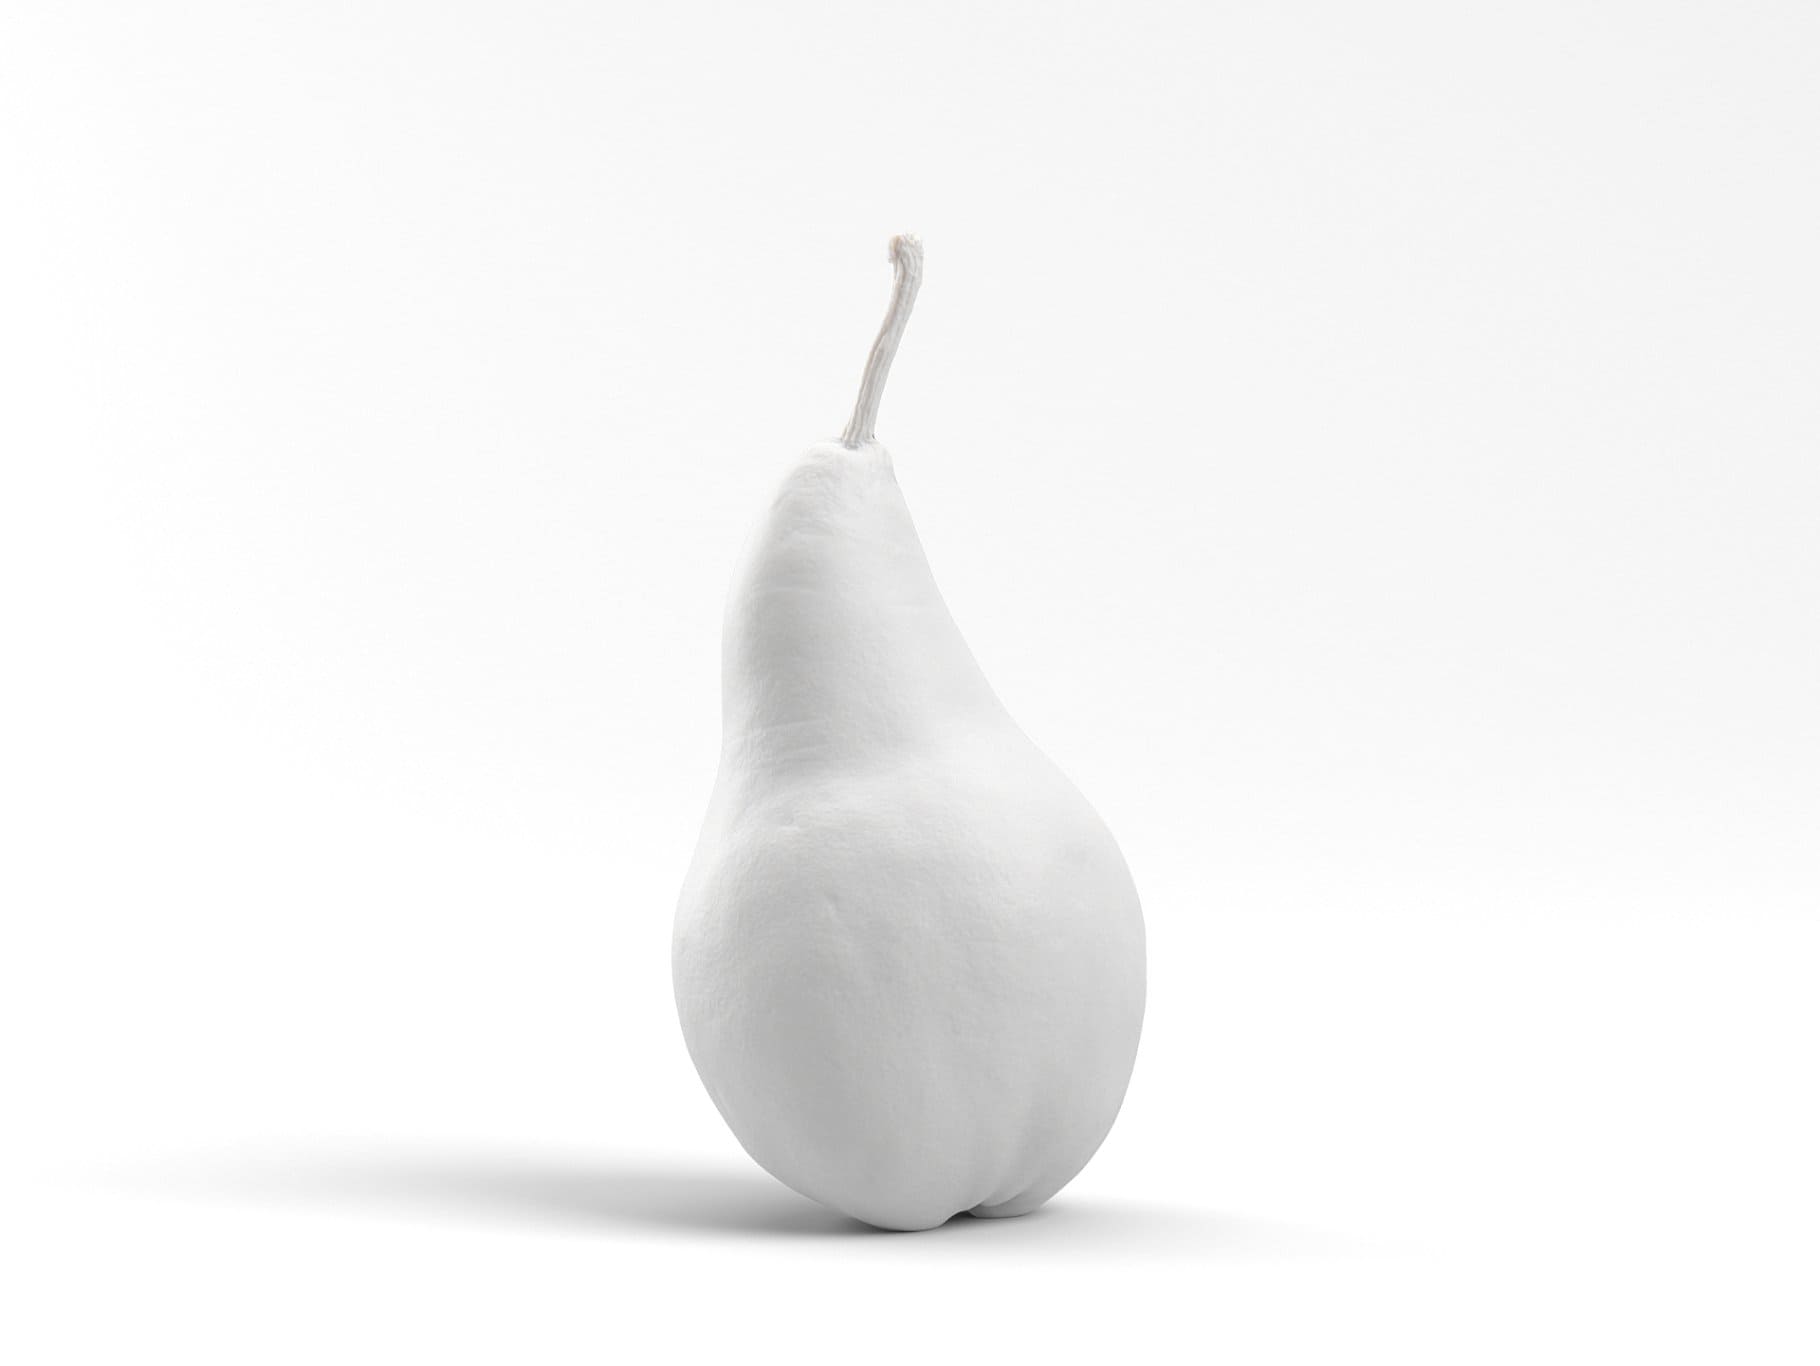 White pear on a white background.